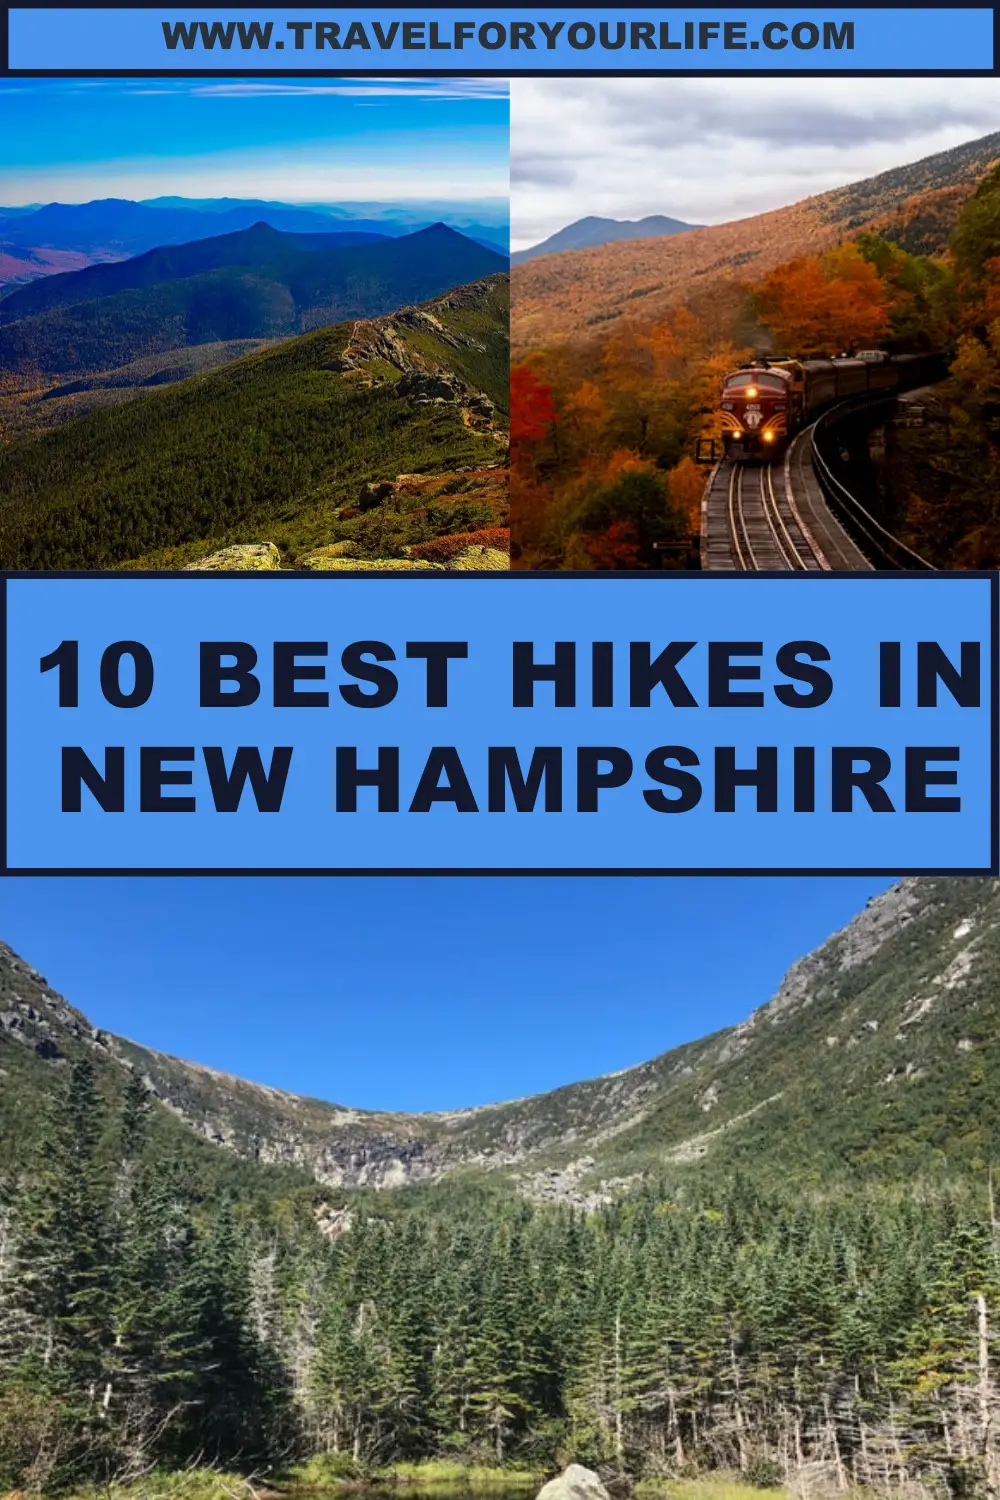 10 best hikes in New Hampshire 